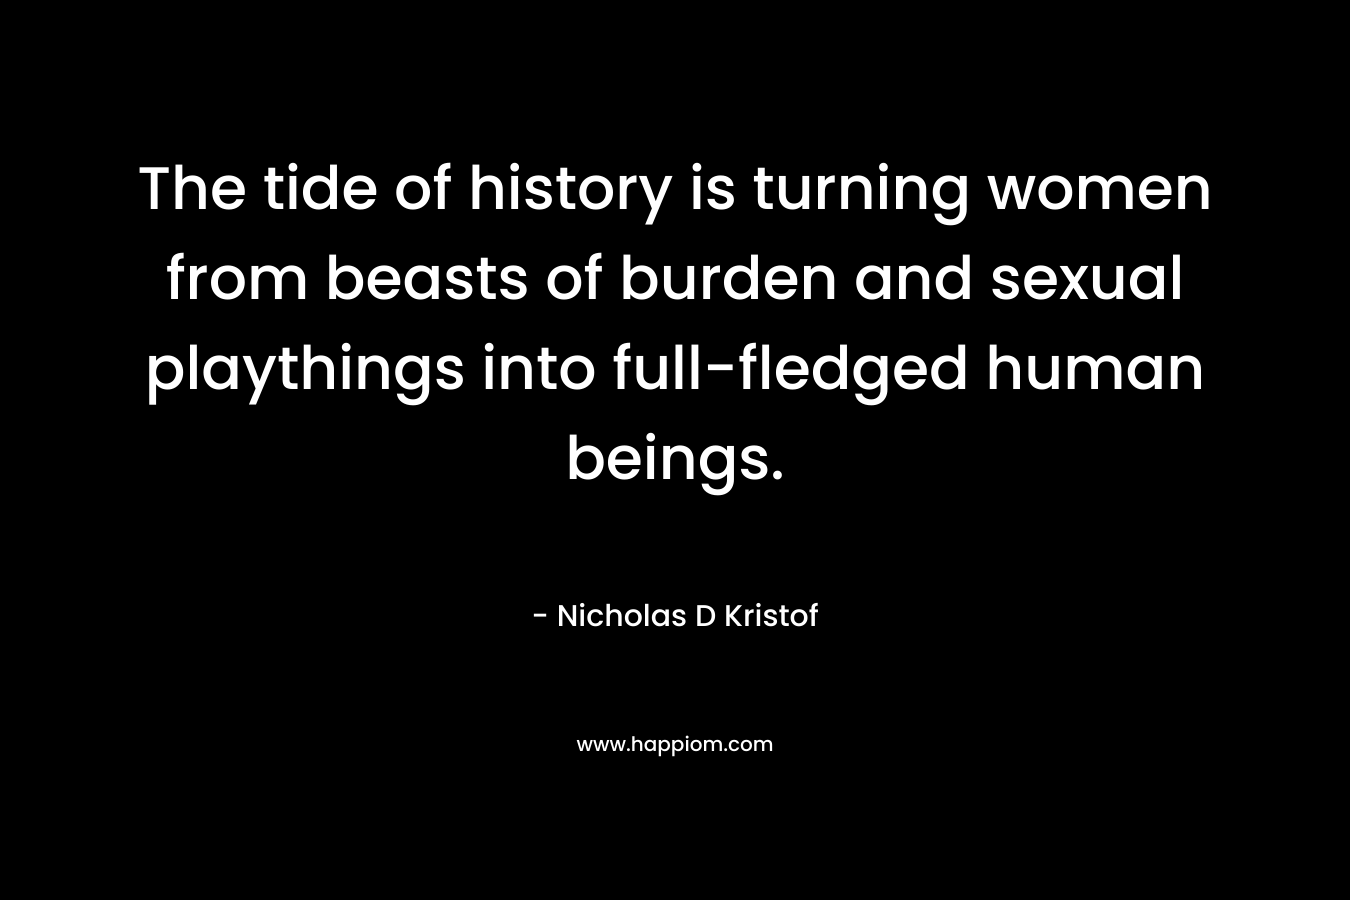 The tide of history is turning women from beasts of burden and sexual playthings into full-fledged human beings. – Nicholas D Kristof